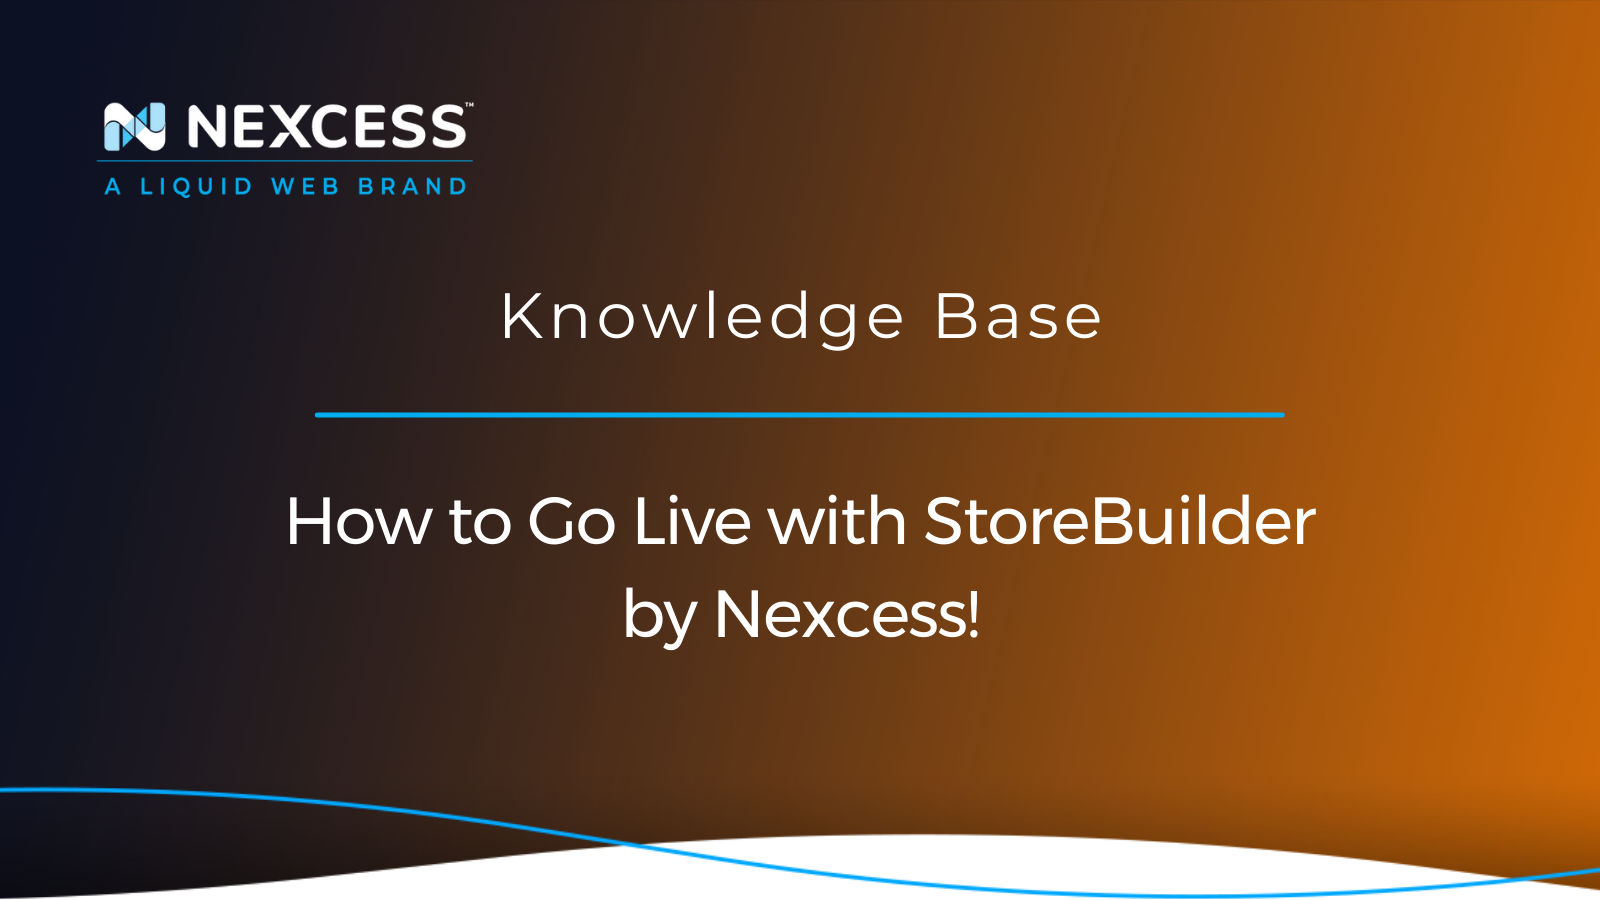 How to Go Live with StoreBuilder by Nexcess!